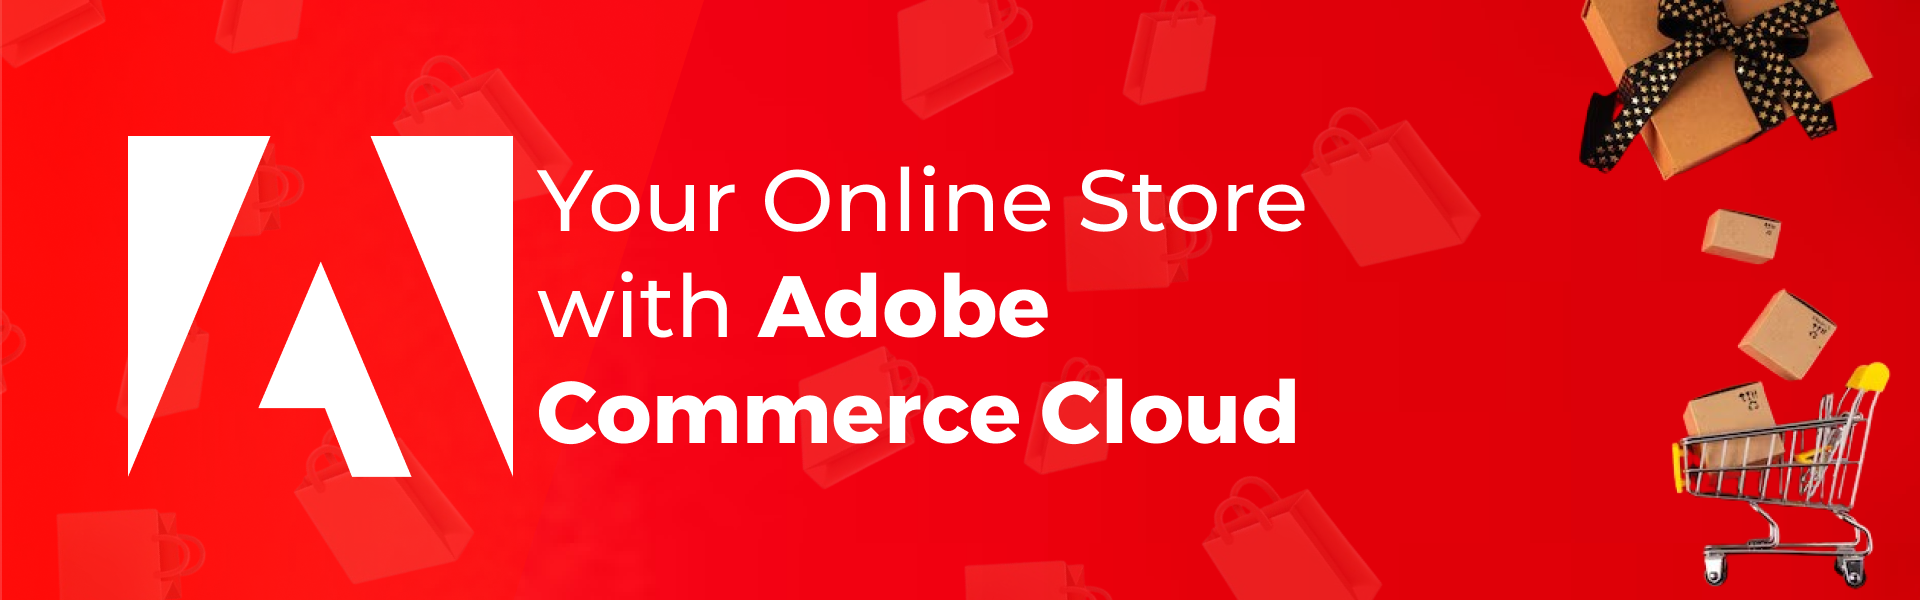 Prefer Your Online Store with Adobe Commerce Cloud